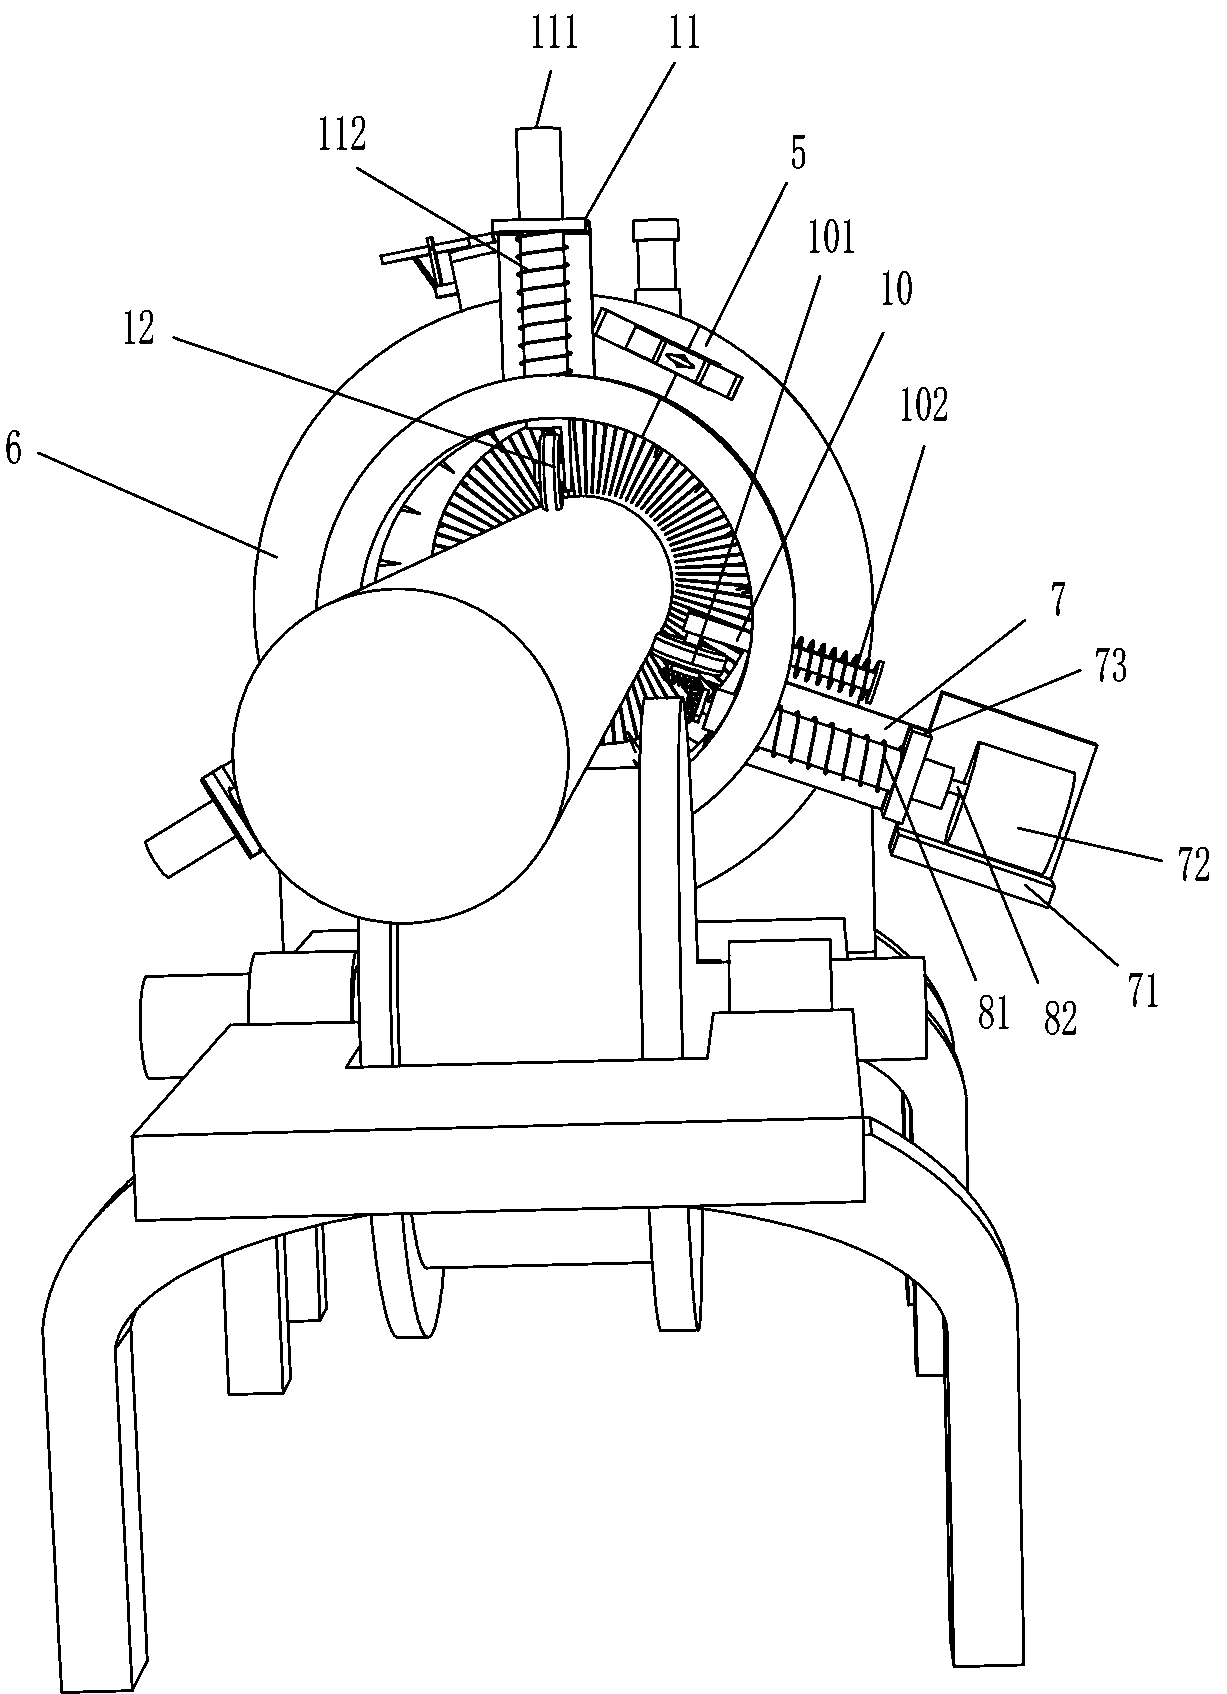 Firefighting pipe paint spraying device